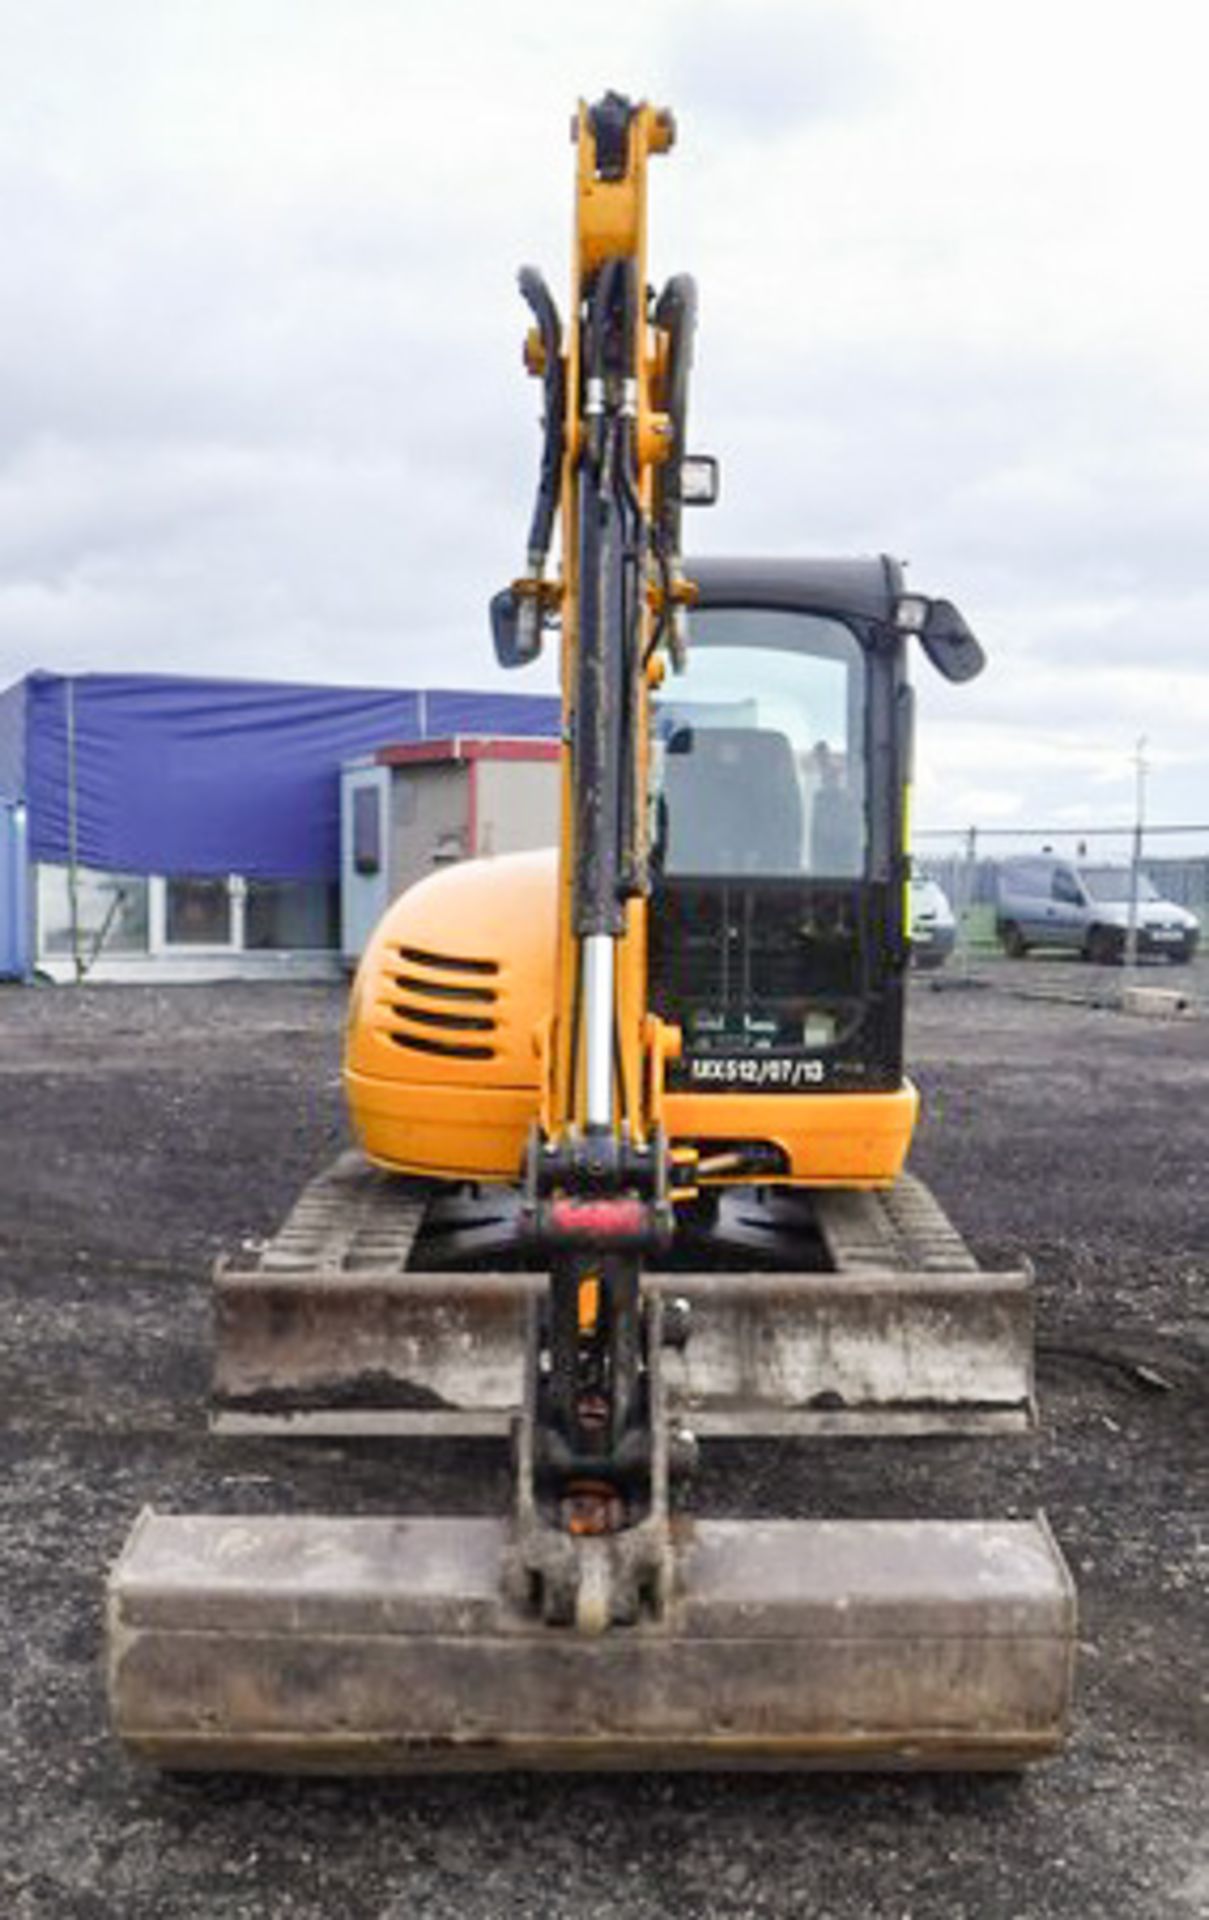 2013 JCB 8045 ZTS, S/N 01071286, REG MX512 2977HRS (SELLER VERIFIES HOURS CORRECT) 1 DITCHING BUCKET - Image 8 of 15